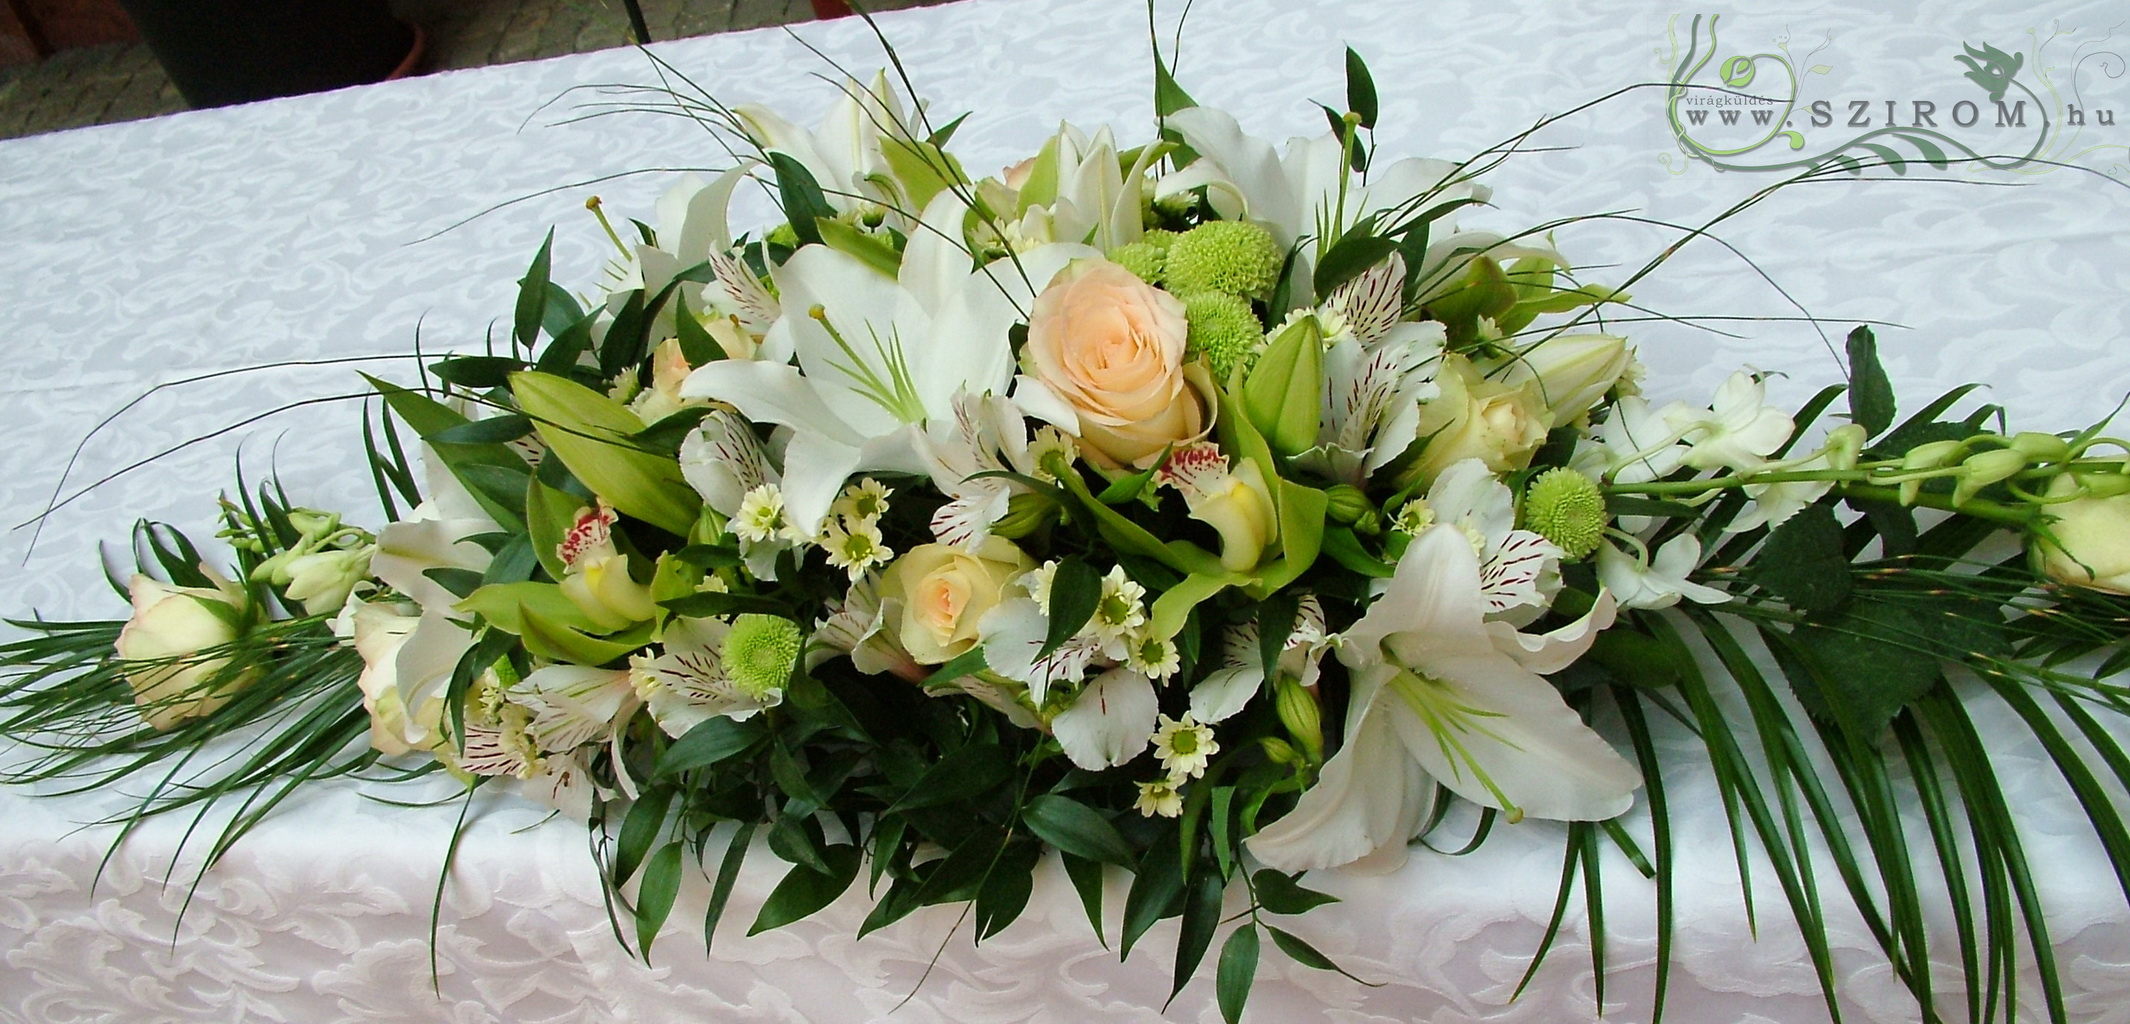 flower delivery Budapest - Main table centerpiece (roses, alstromeries, pompoms, santinis, lilies, dendrobium, cymbidiums, white, green, peach), Ybl Palace, wedding